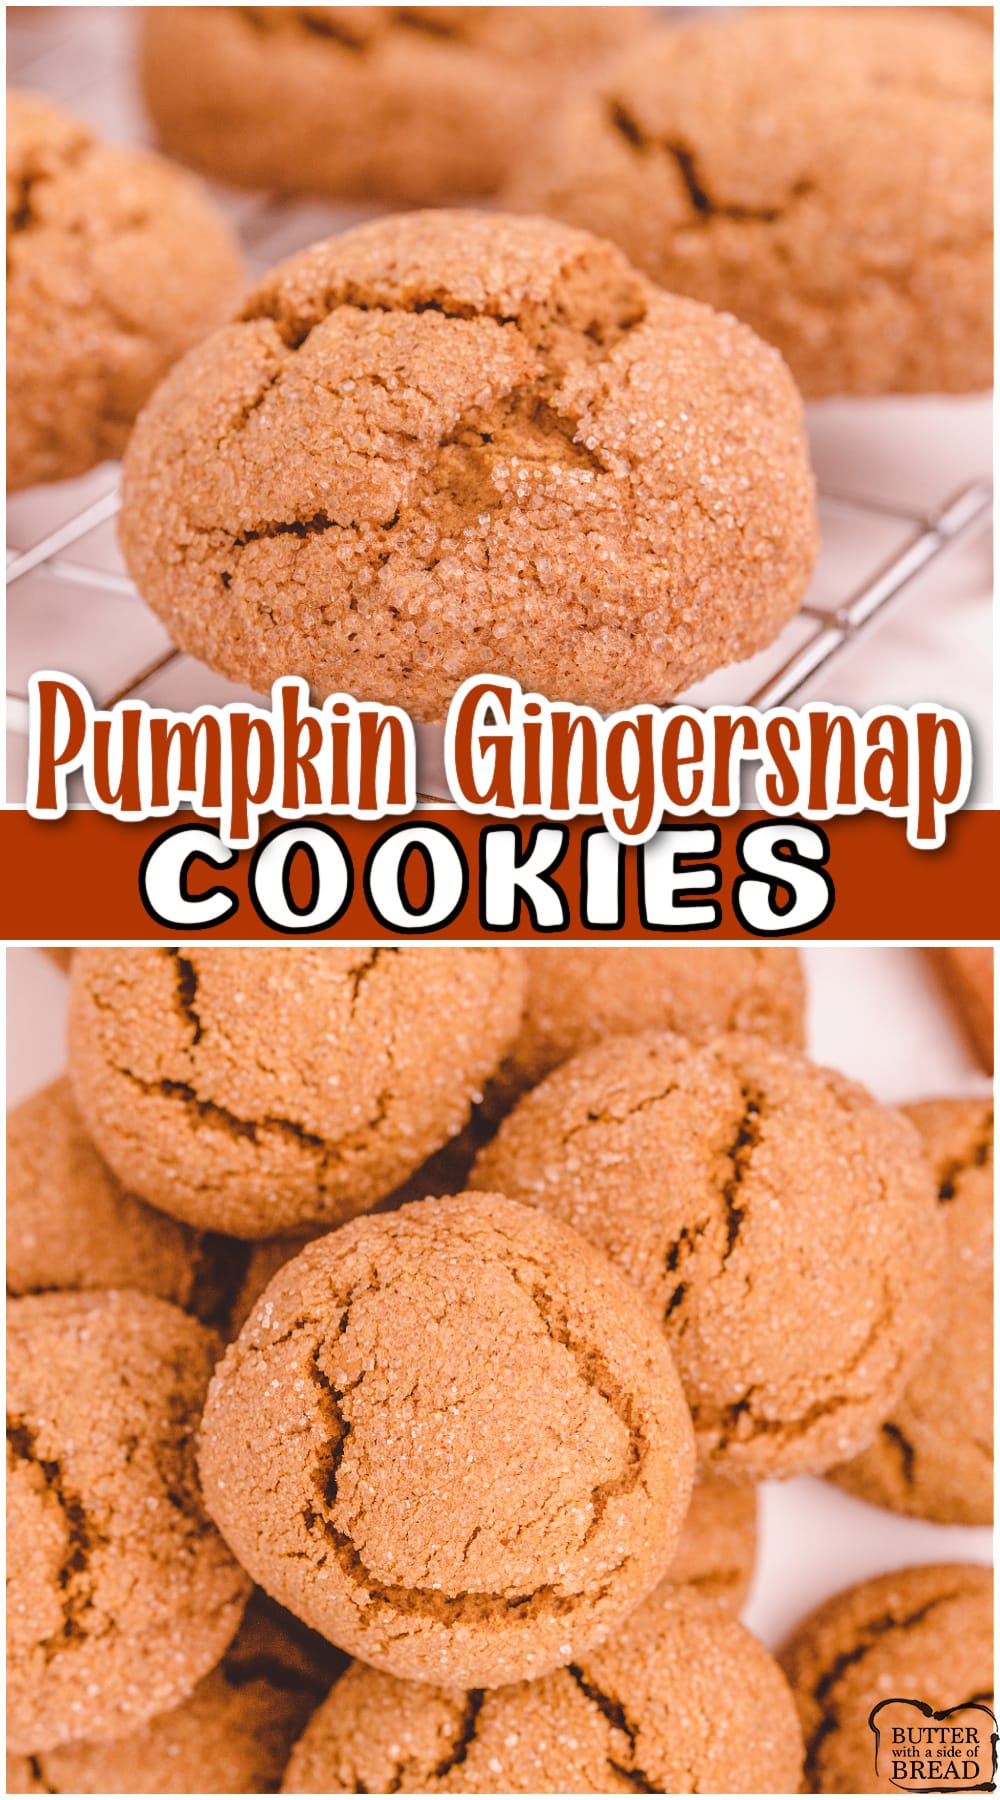 Soft Pumpkin Gingersnap Cookies are pumpkin cookies made with molasses, ginger & cinnamon. This pumpkin cookie recipe is a nice twist on a traditional treat, perfect for holiday baking.